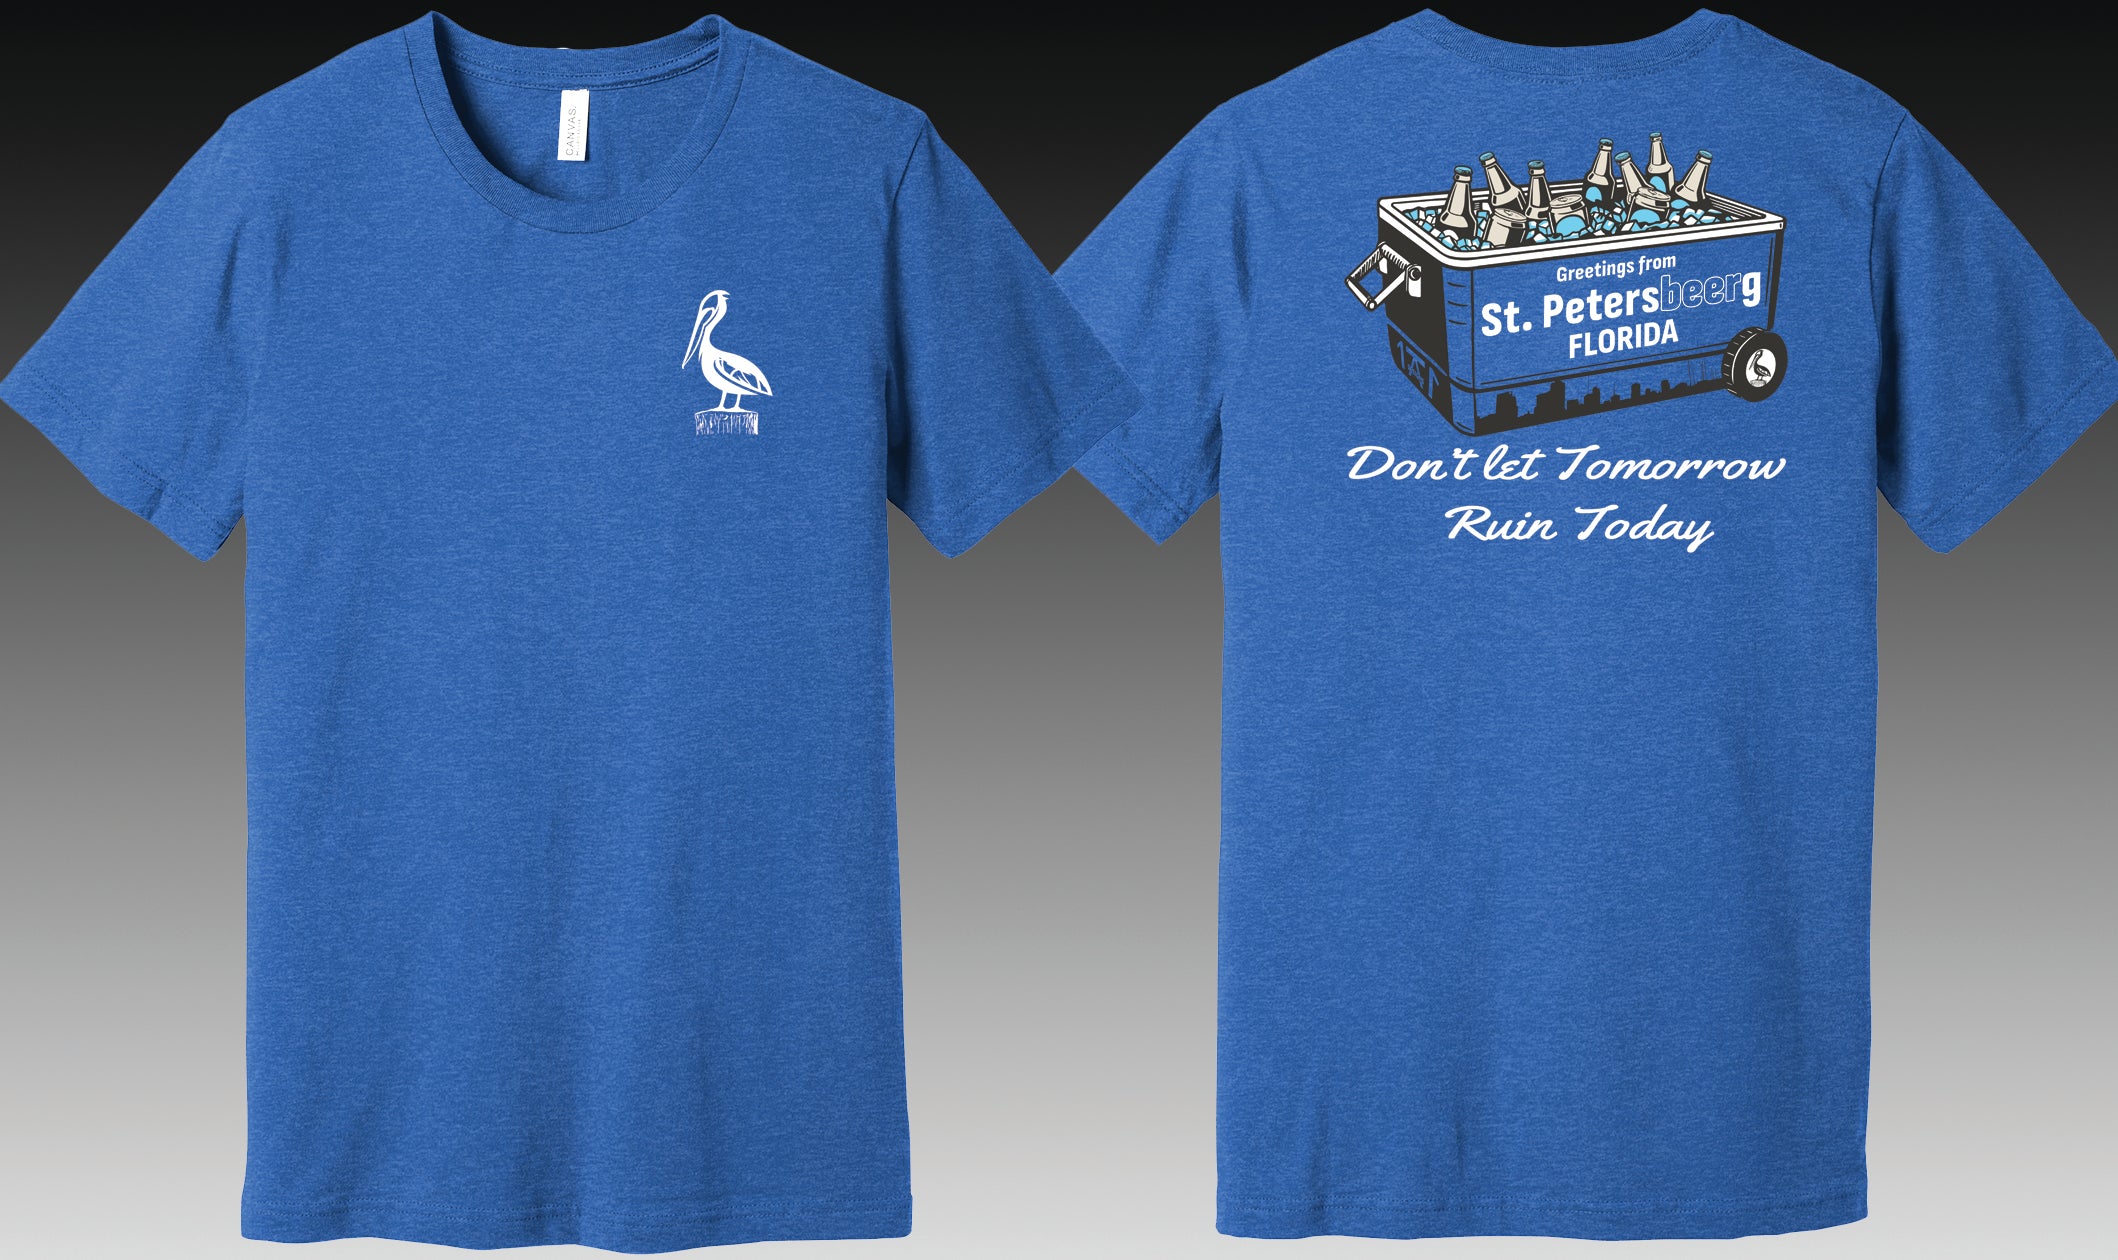 Royal blue t shirt featuring a cooler with St. Petersbeerg design and St. Pete St. Petersburg skyline made local